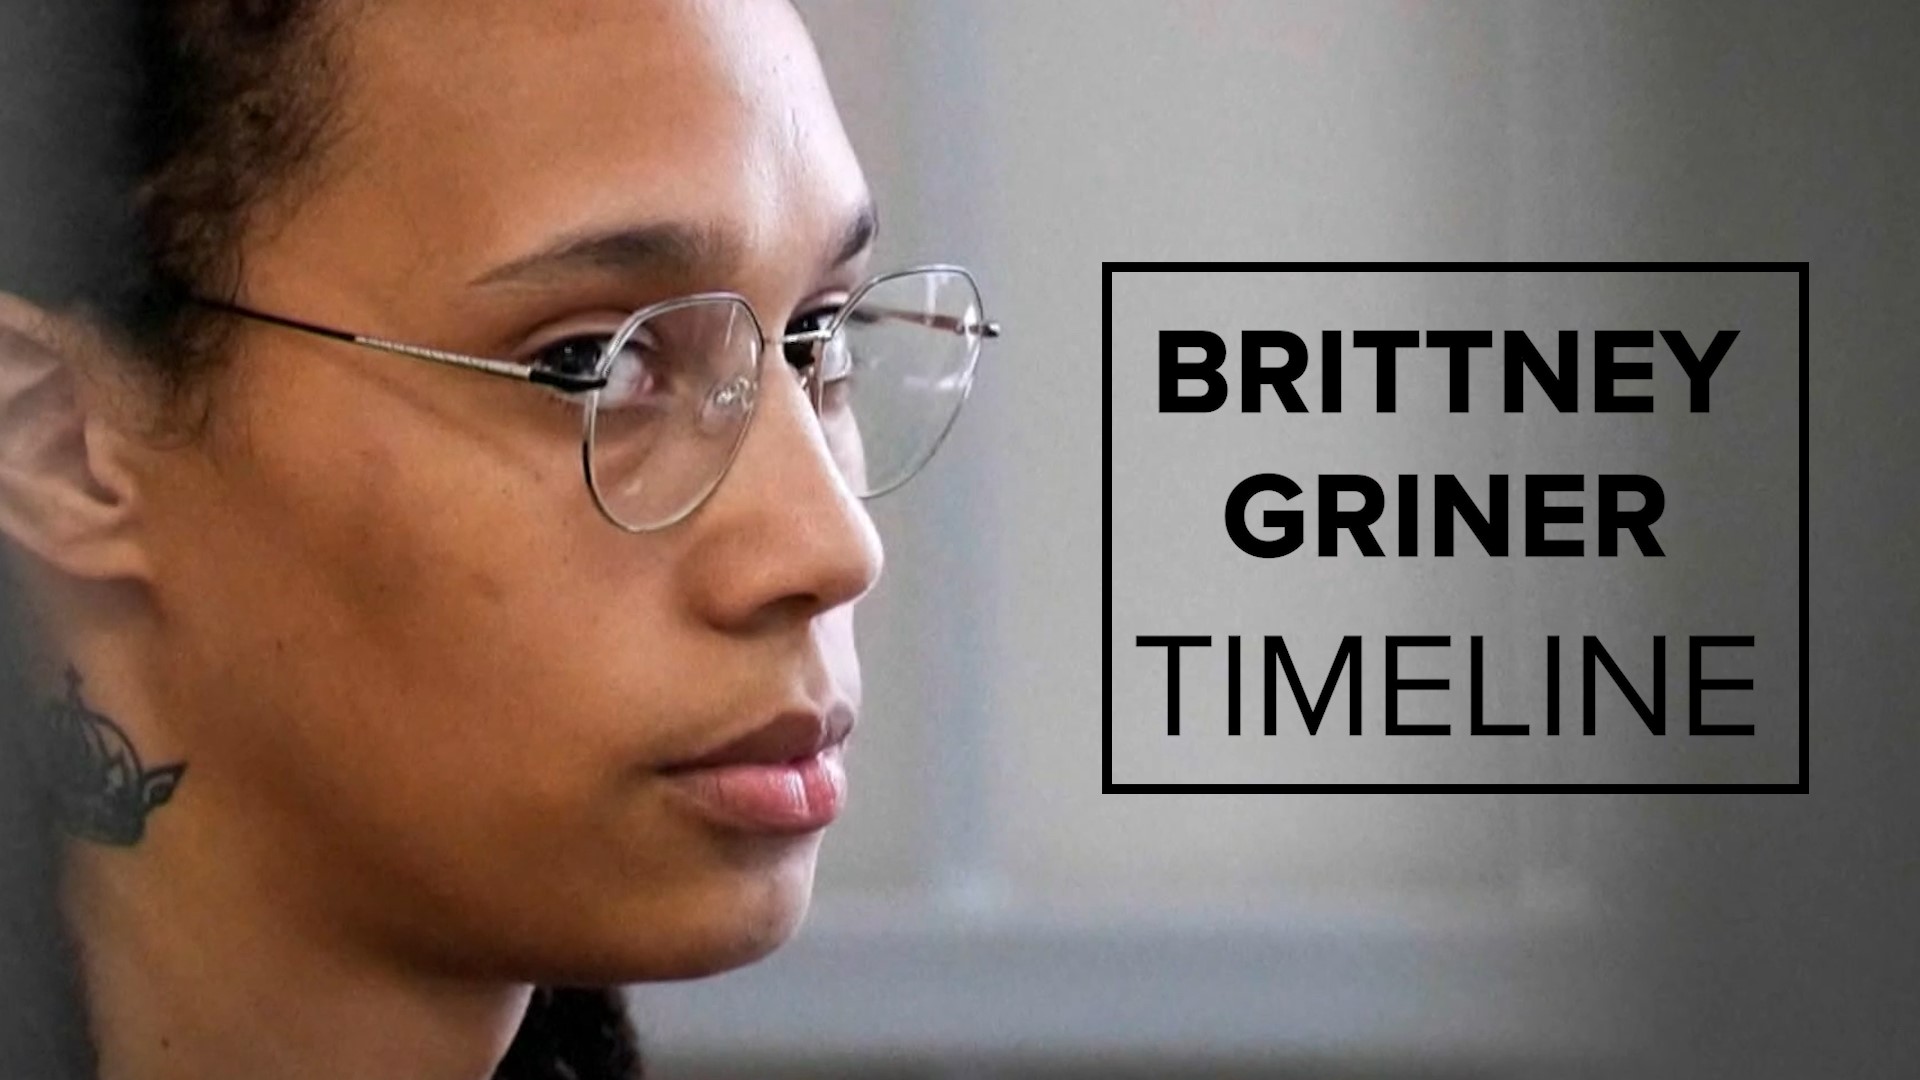 A look back at Brittney Griner's ordeal from her arrest in February in Russia to release on Dec. 8.